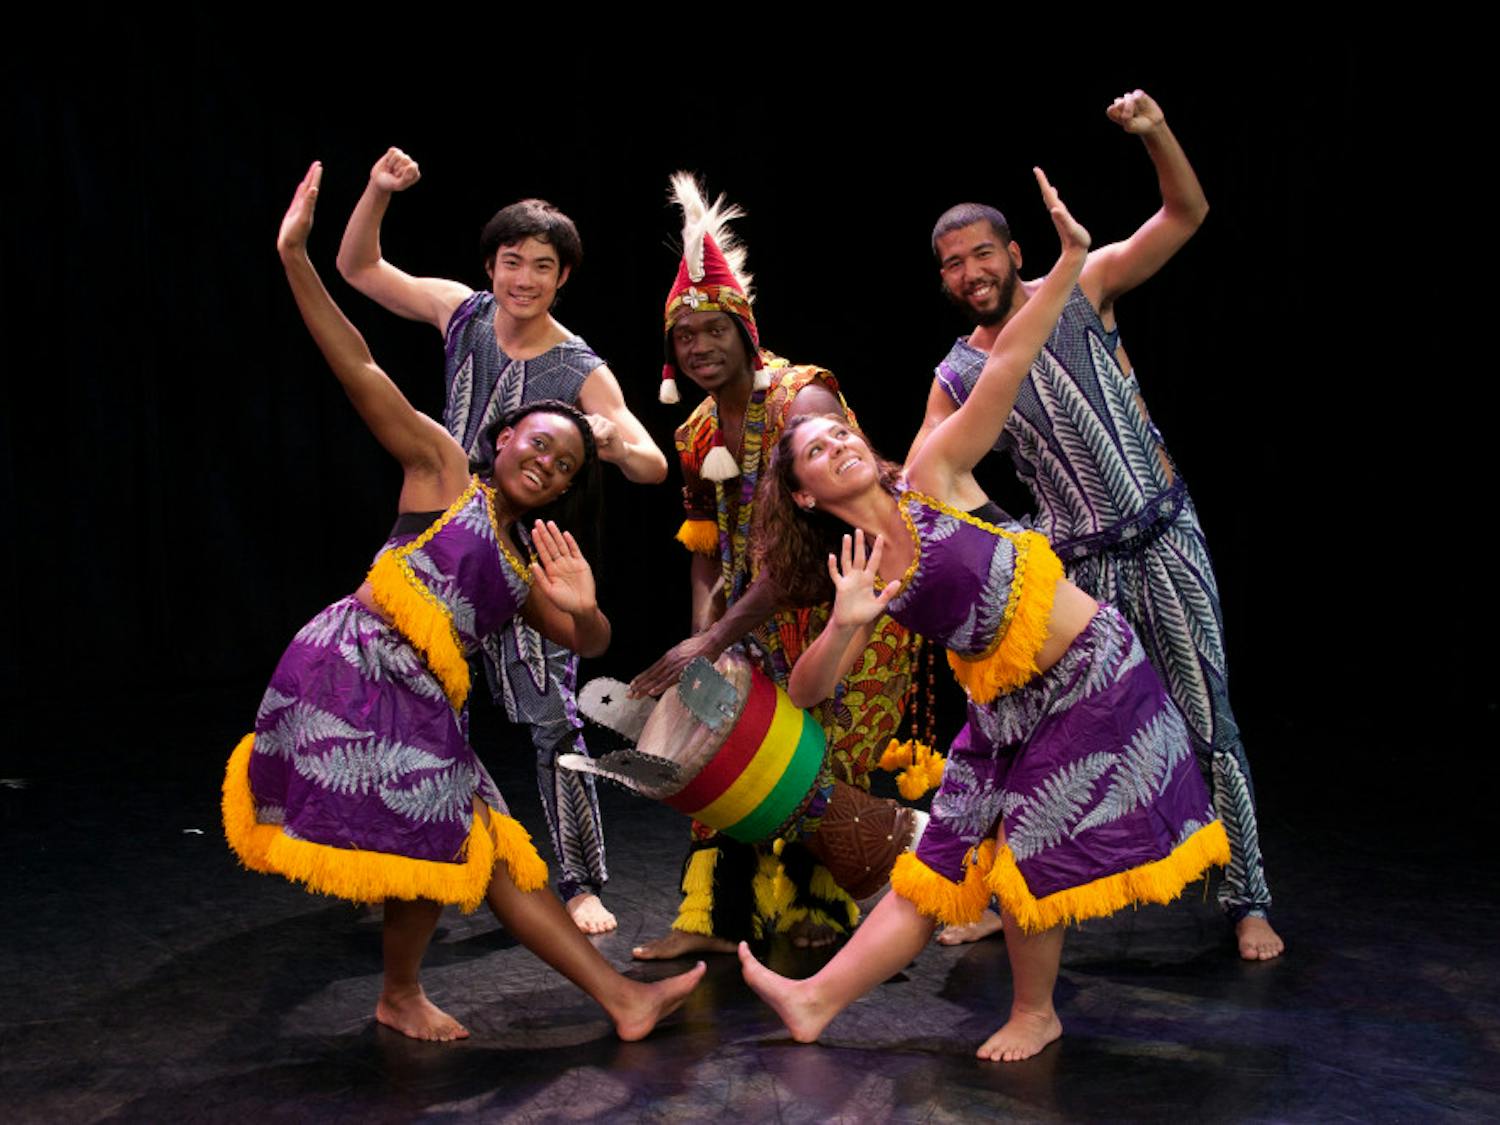 Pictured left to right: Dancers Diamia Foster, Daniel Morimoto, Amanda Ruiz and Larry Rosalez Lewis with drummer Aboubacar Soumah pose in costume for the Agbedidi performance. You can see it this weekend at the Constans Theatre at $17 for the general public and $13 for students.